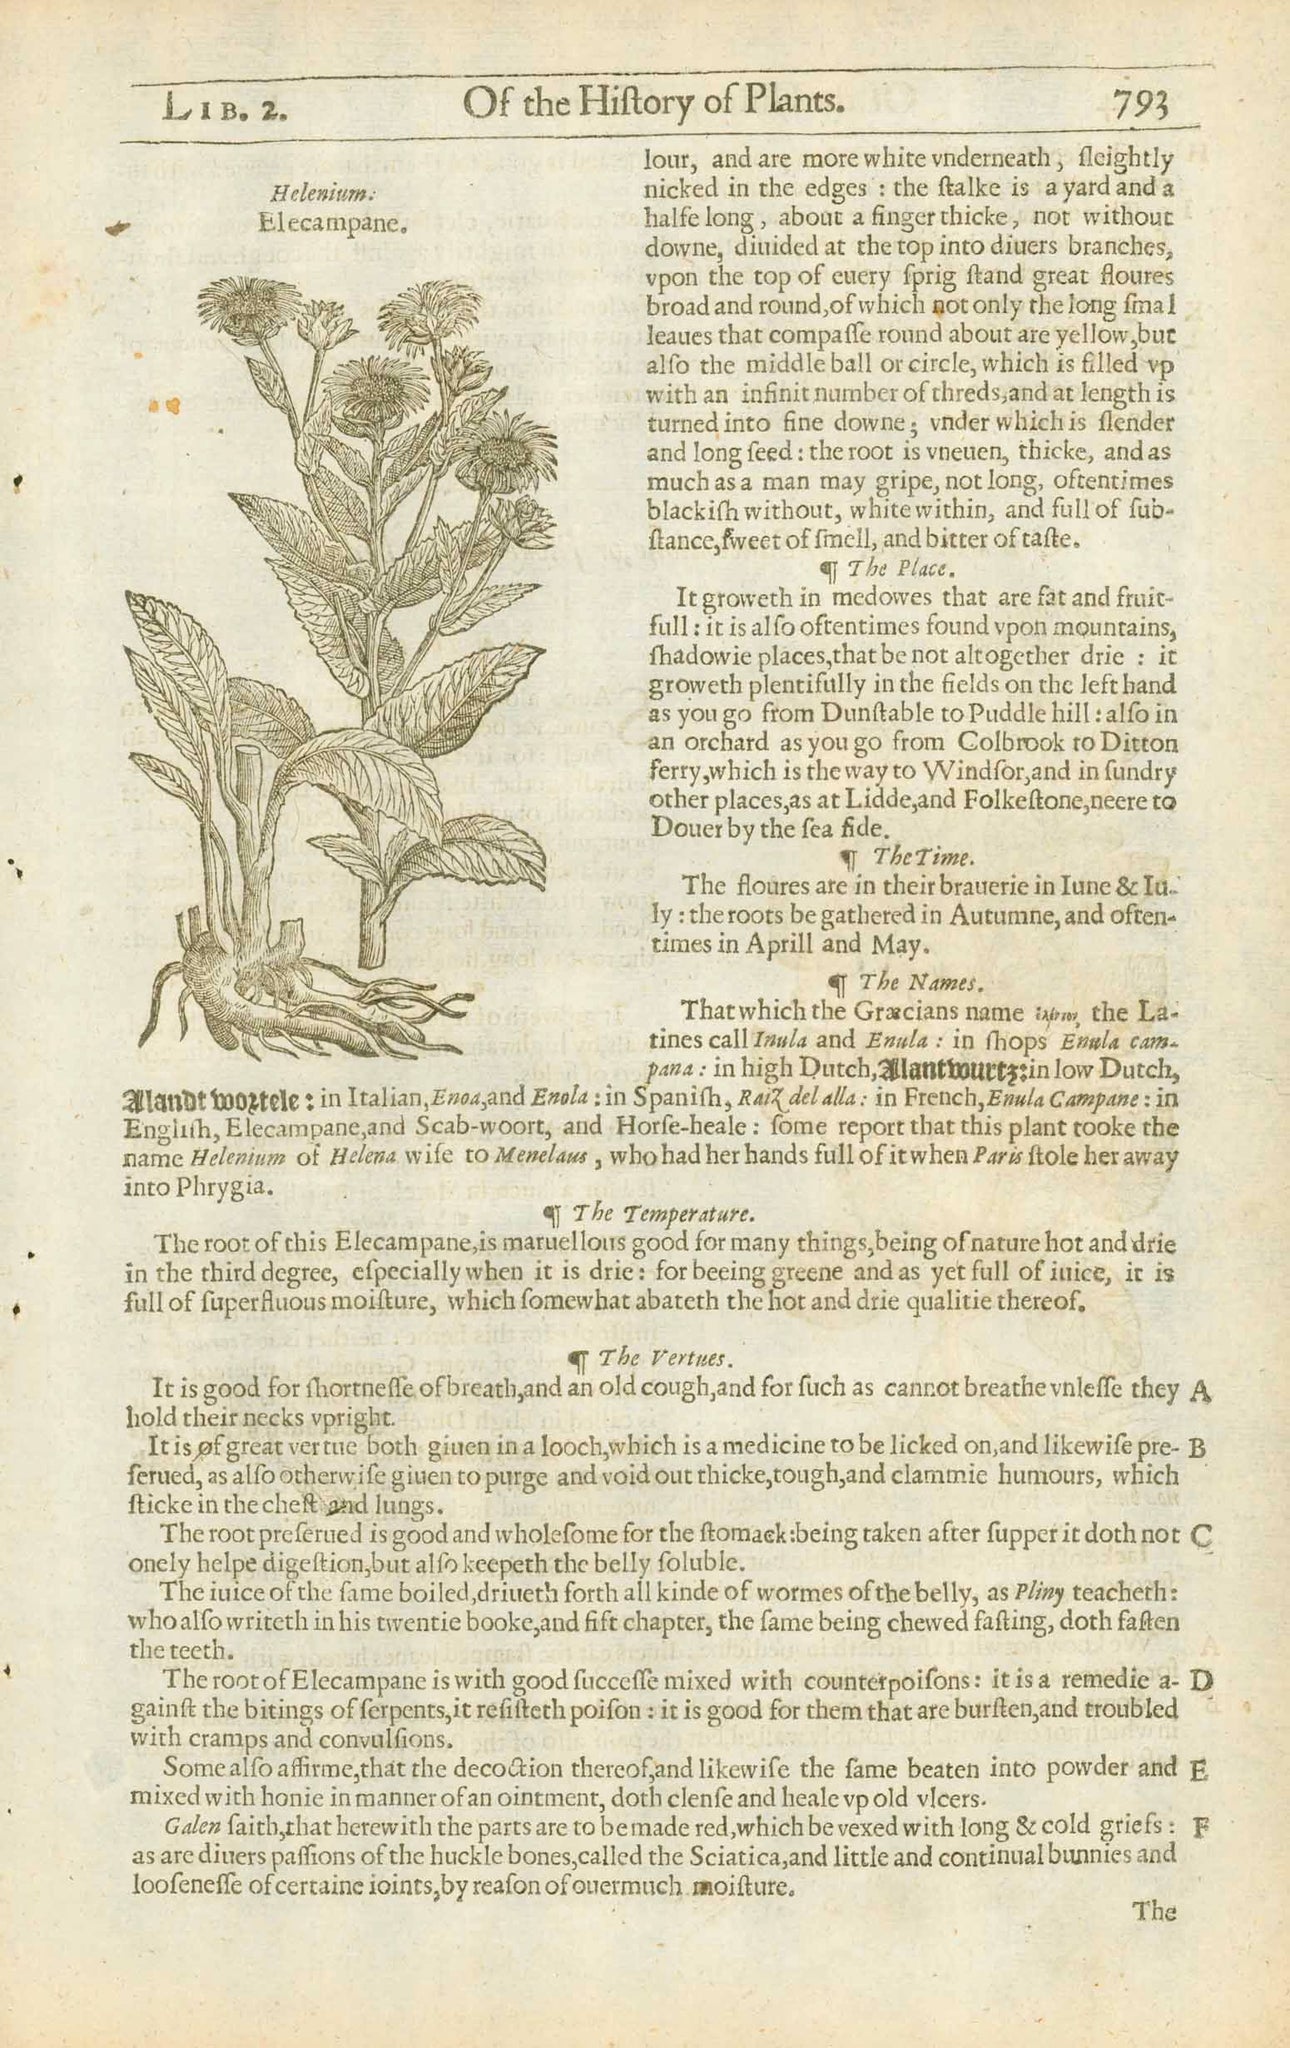 Original antique print, Antique woodcut by John Gerard from his "Herball" published in 1597.  "Heleneium Elecampane"  On the reverse side is an image and article about "Alliaria Sauce alone".    The entire work/text continues about the medicinal uses of each plant. Gerard was a botanist and apothecary and cultivated his own extensive garden in England. He often noted where the various plants could be found in England and elsewhere. These are some of the earliest prints made of many plants.